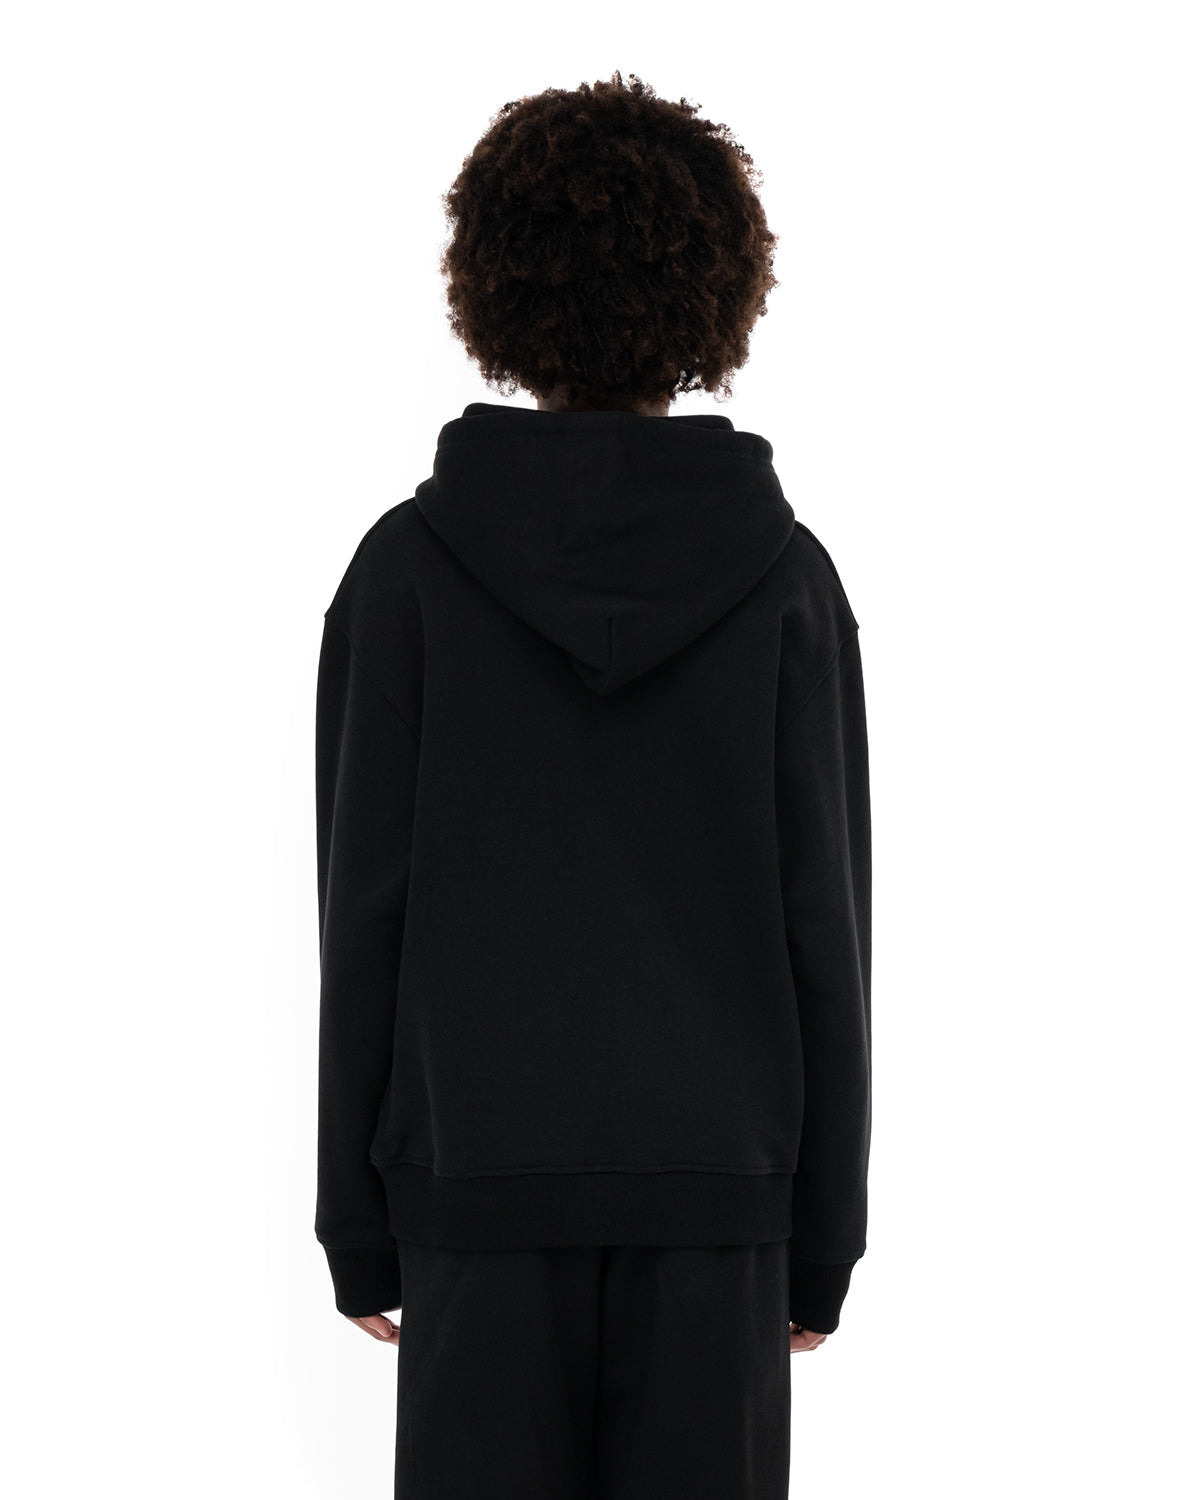 Concept  Hoodie | Blowhammer